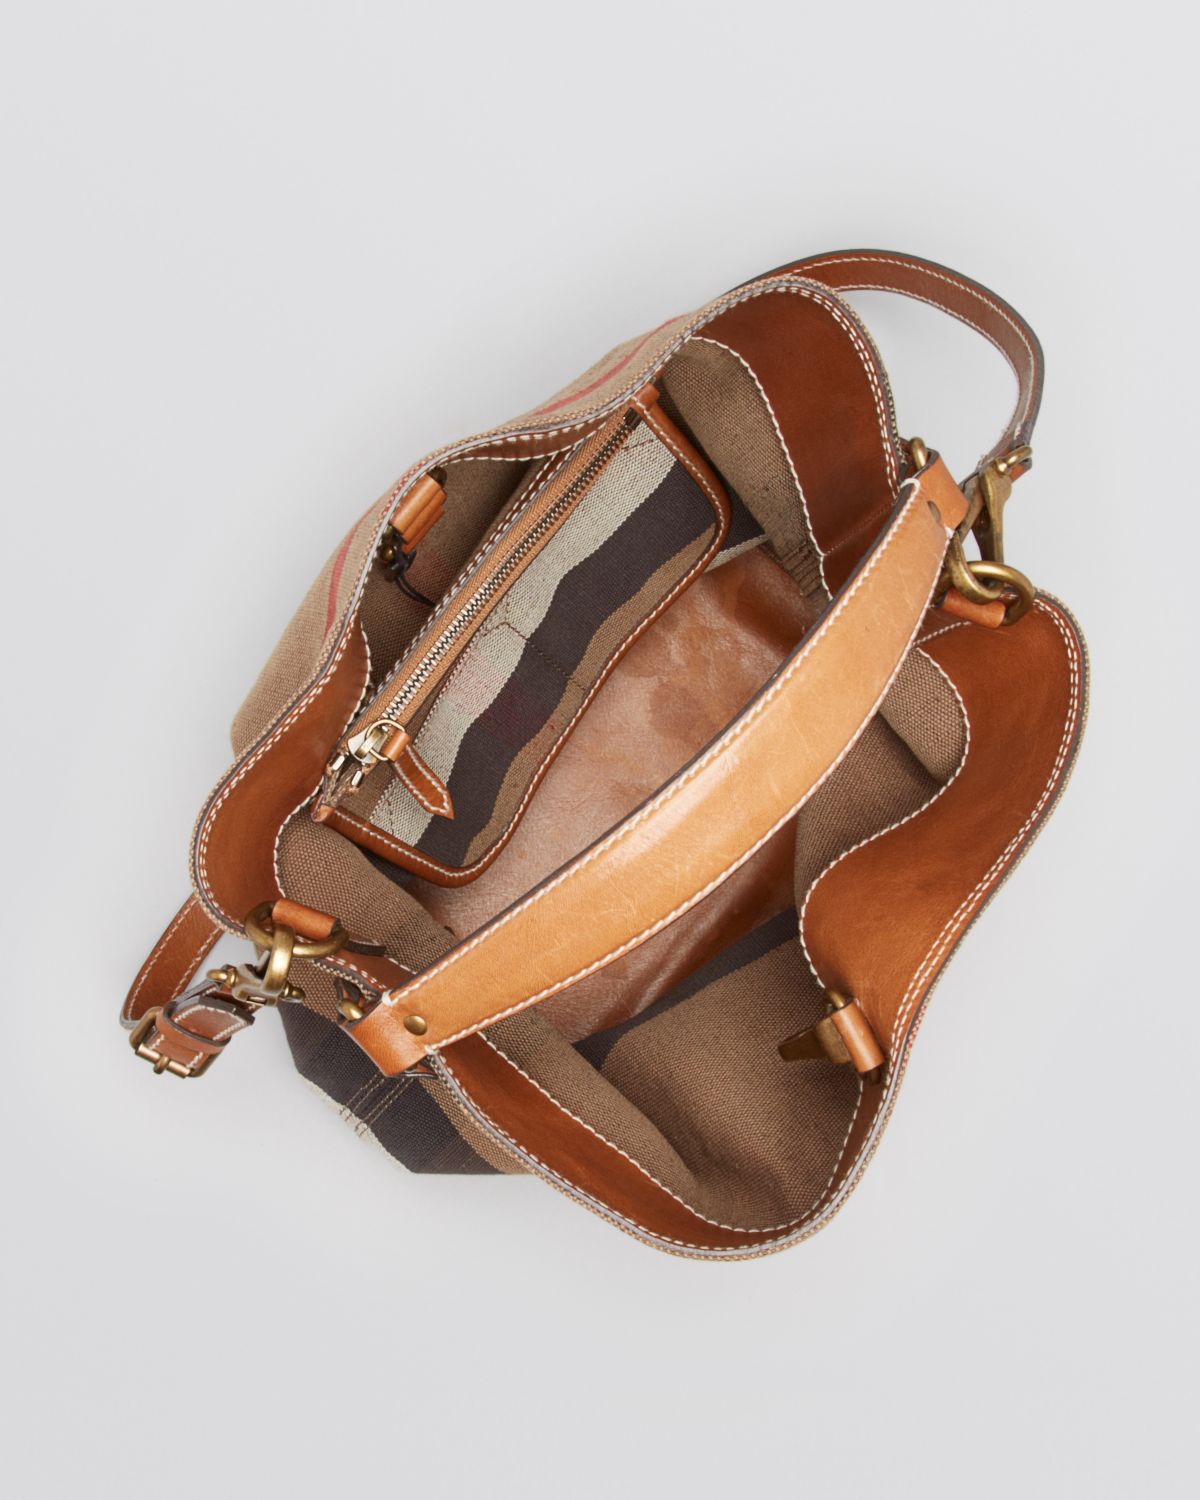 Burberry Canvas Check Medium Ashby Hobo in Brown | Lyst